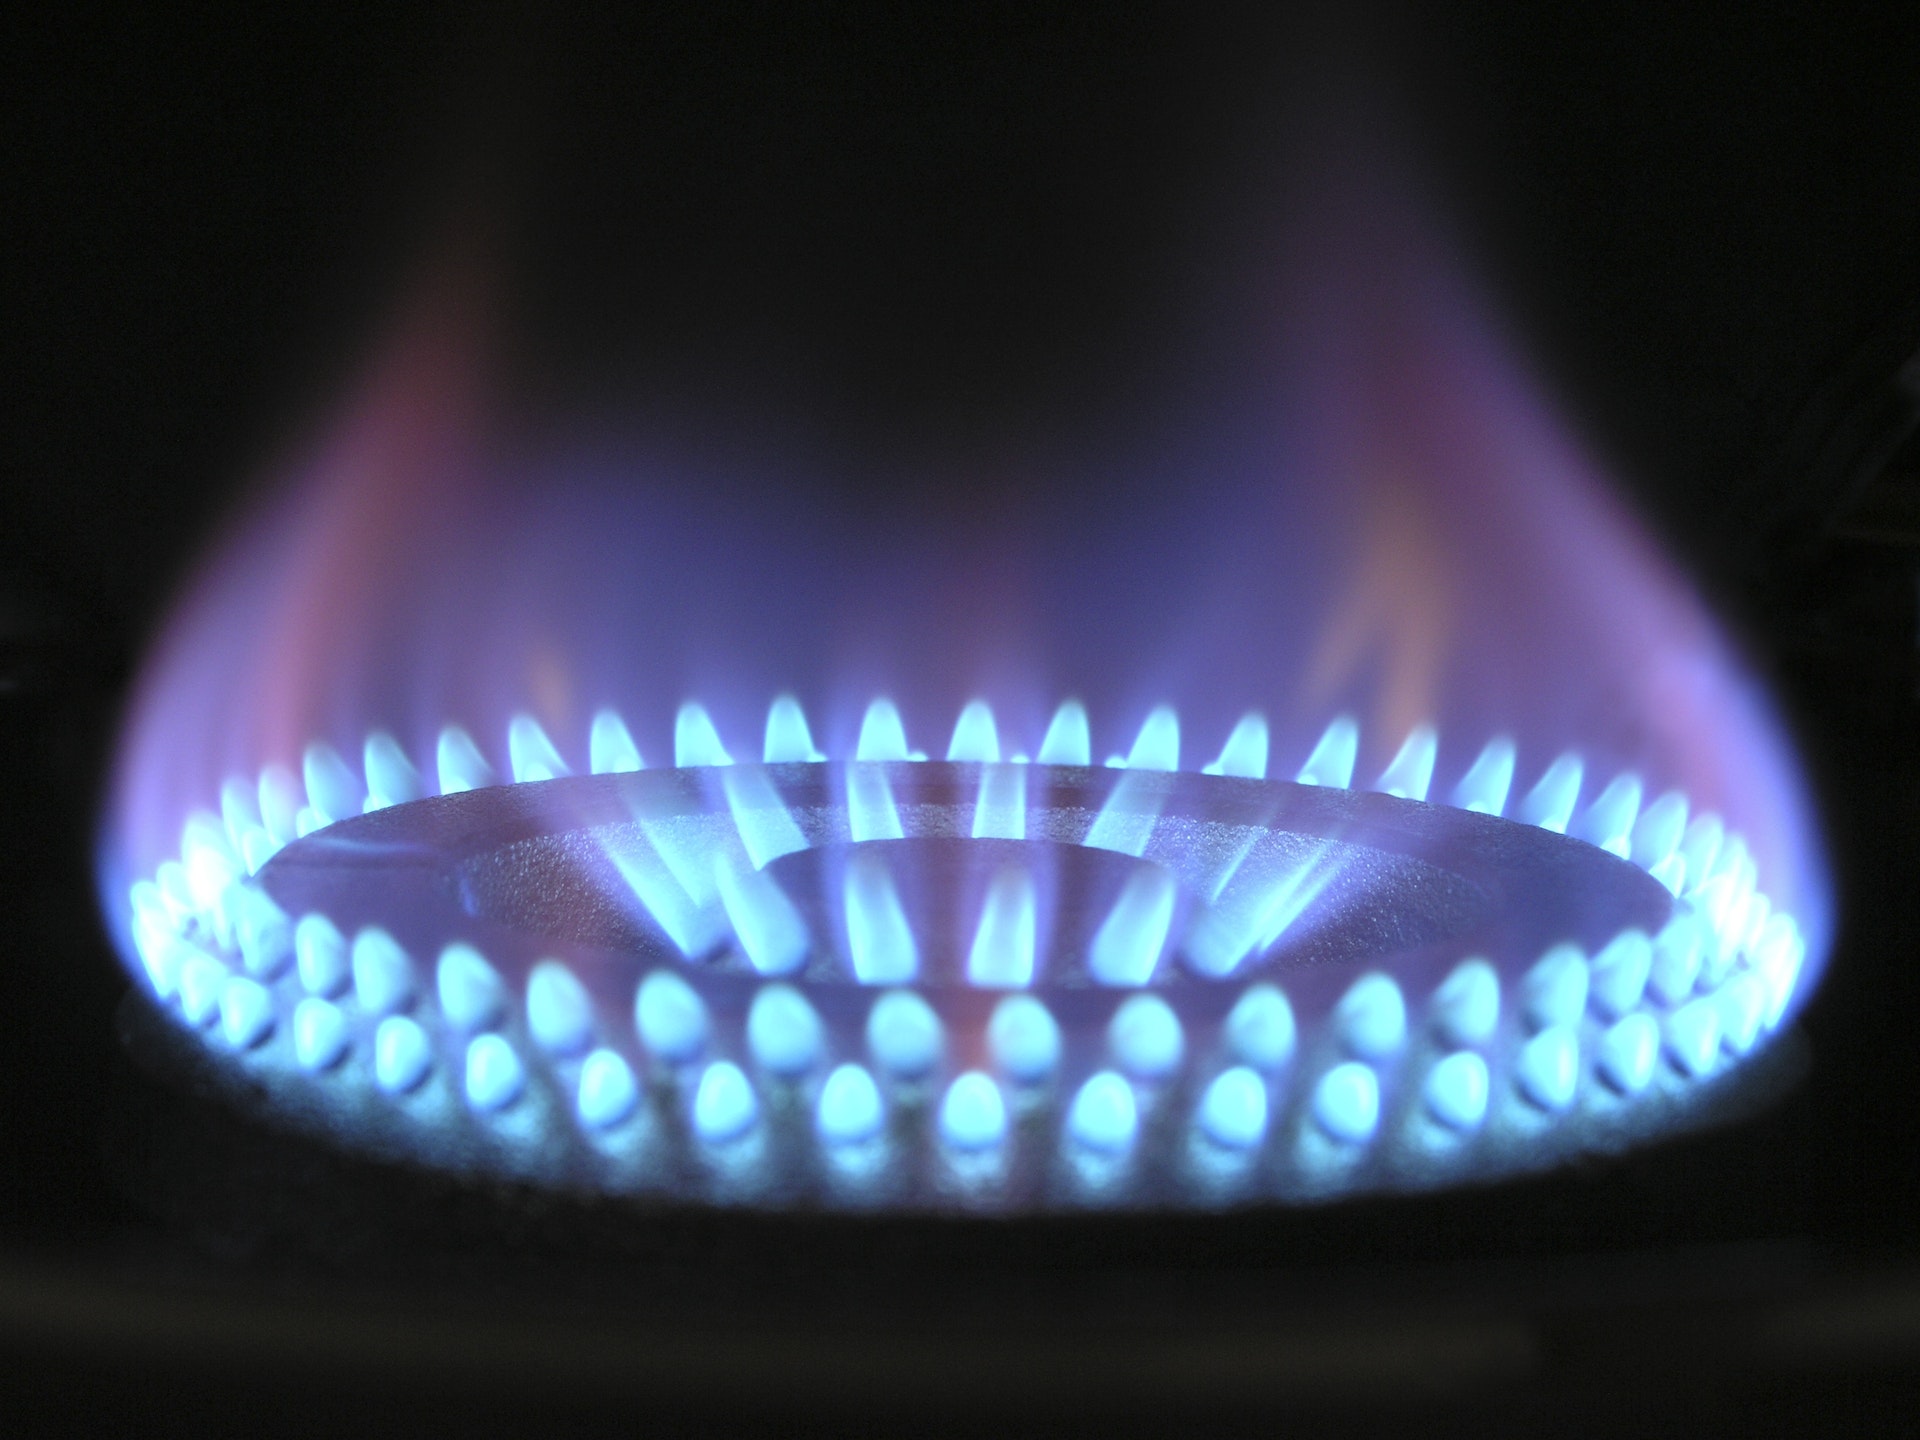 Federal court overturns first natural gas ban in the U.S.